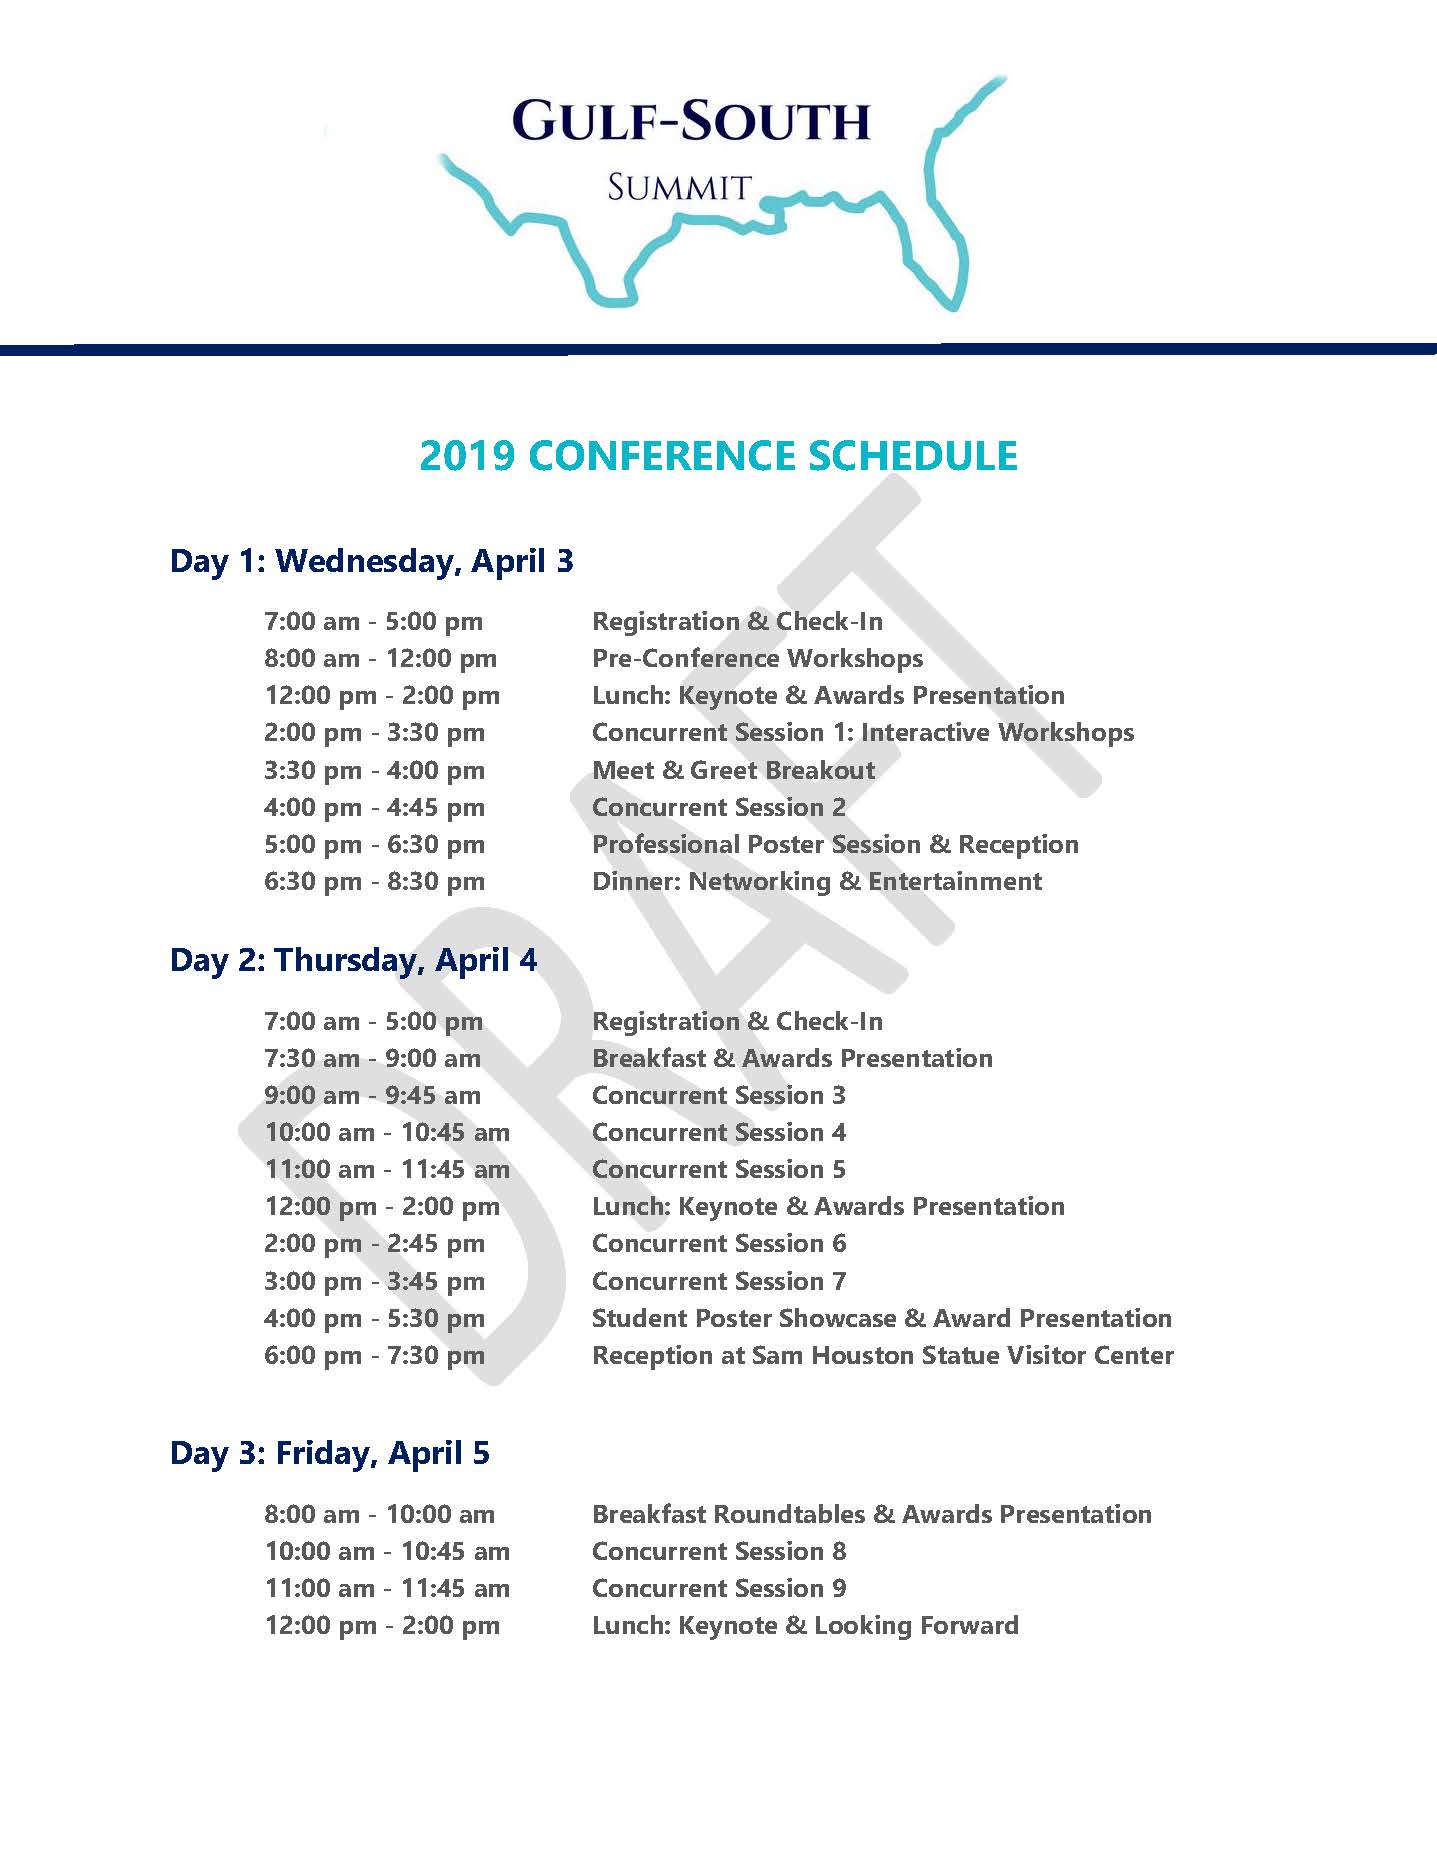 2019 Conference Schedule GulfSouth Summit